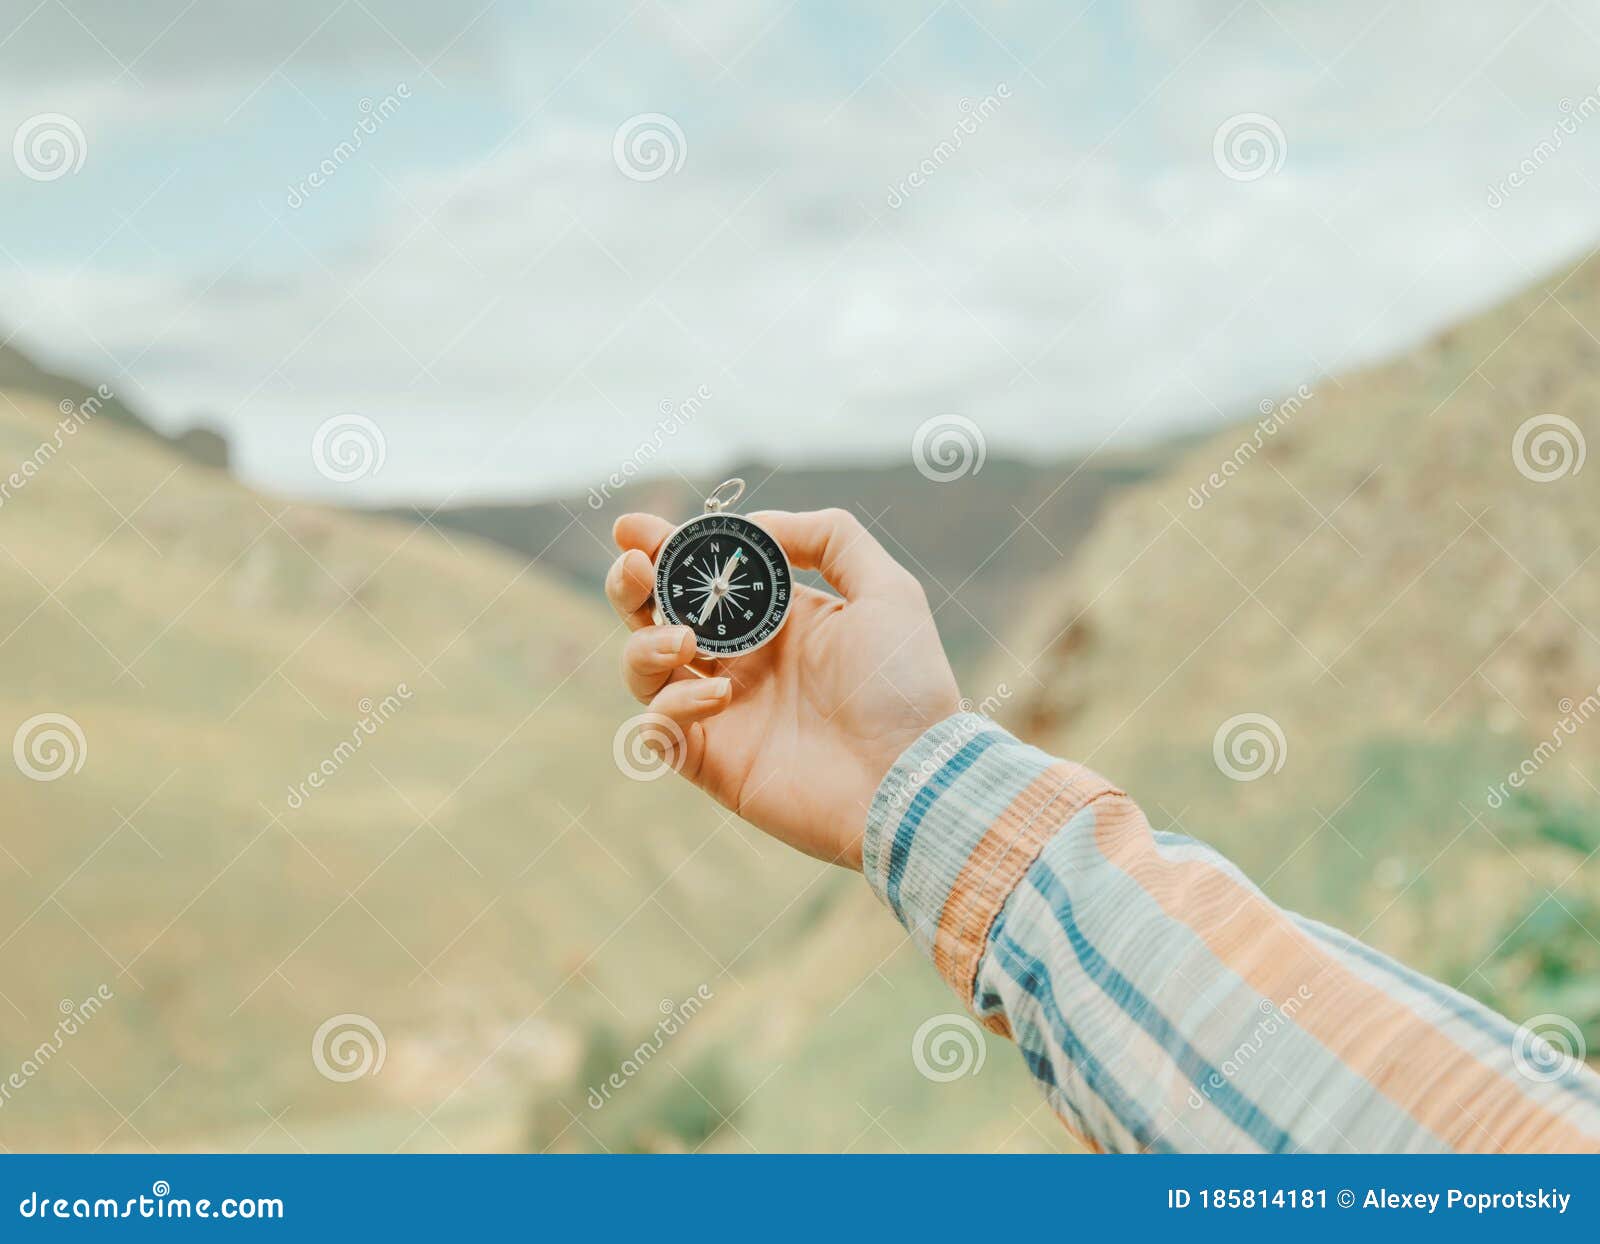 woman searching direction with a compass in mountains, pov.